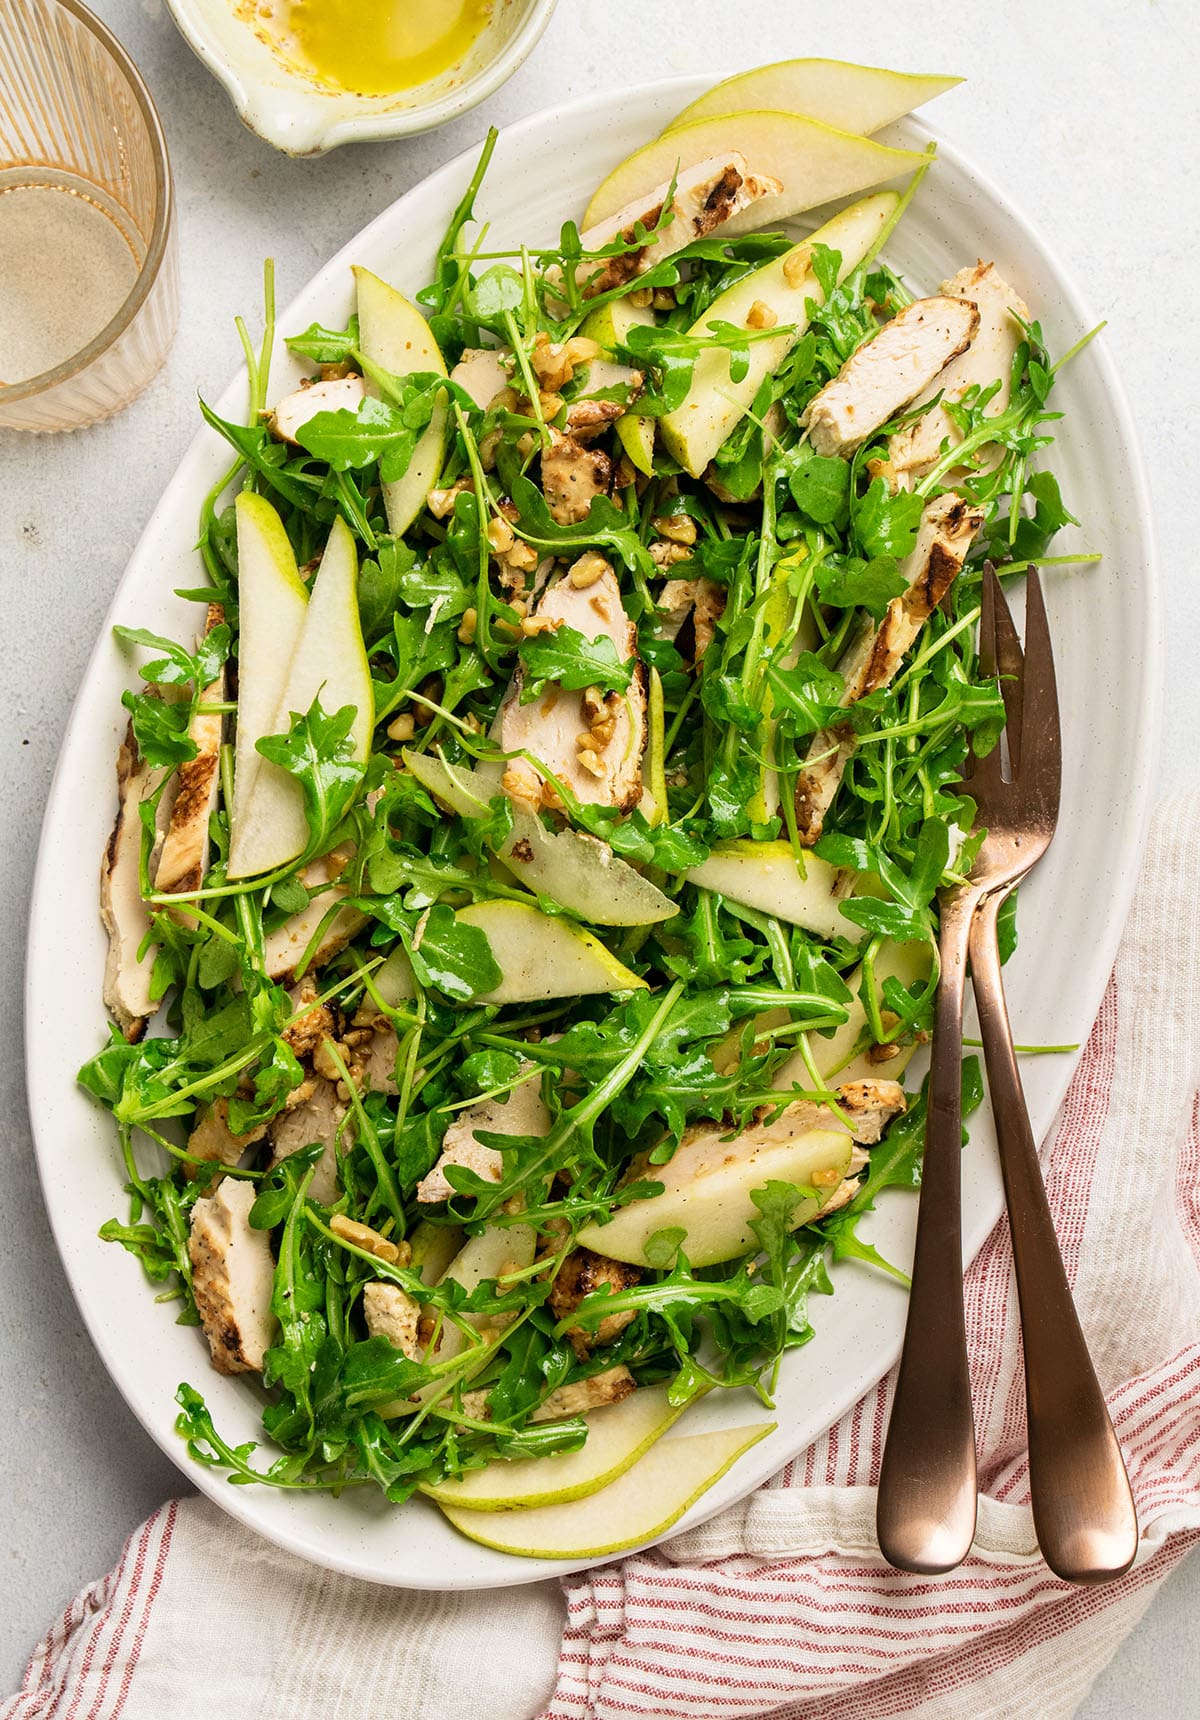 Arugula chicken salad topped with fresh pear slices.